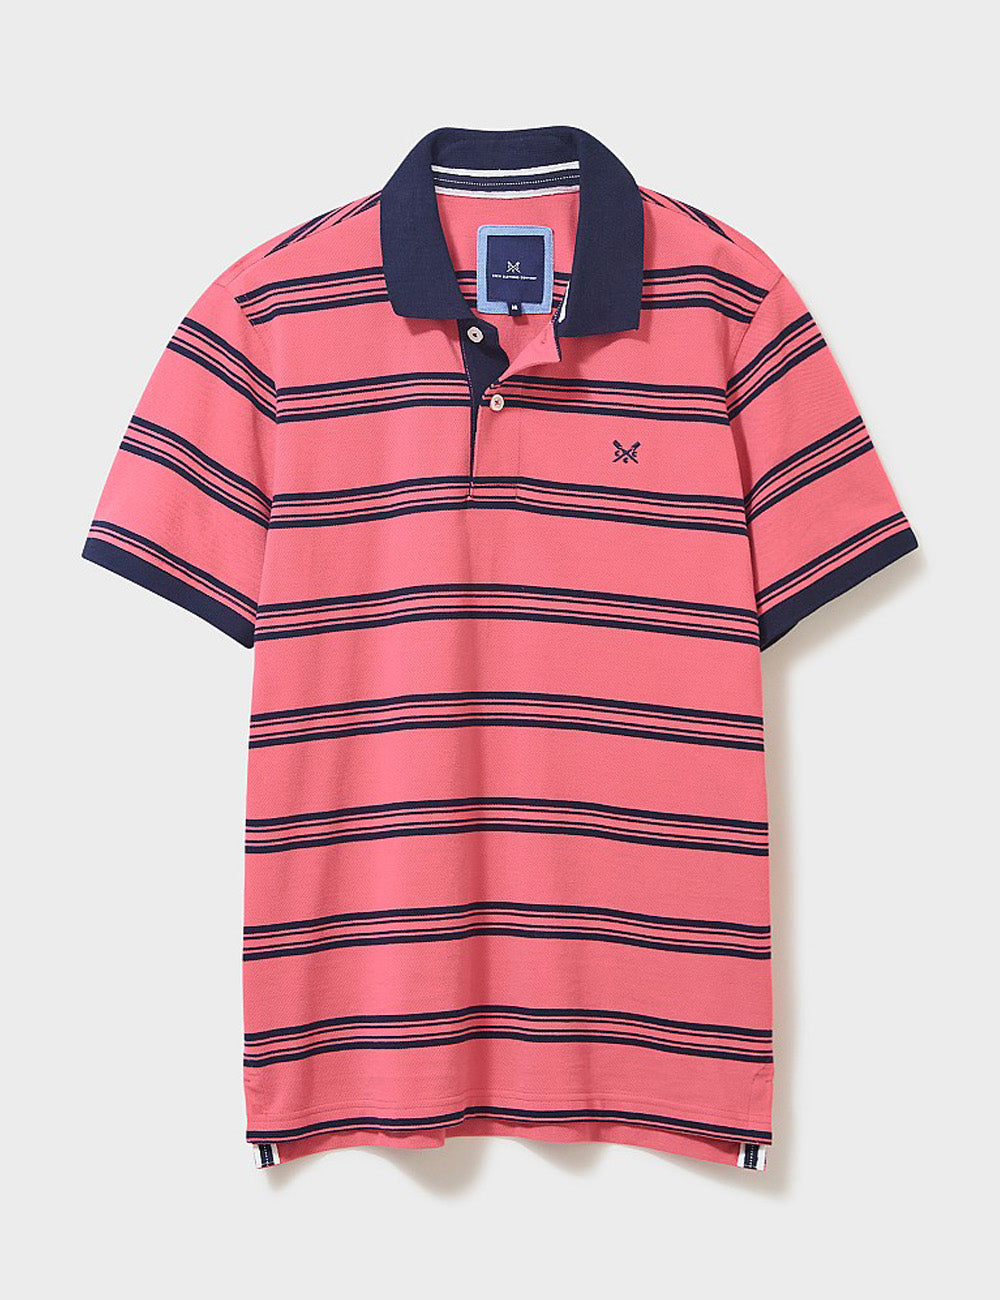 Crew Clothing's Westcott Polo Shirt in Rapture Rose/Navy on a grey background